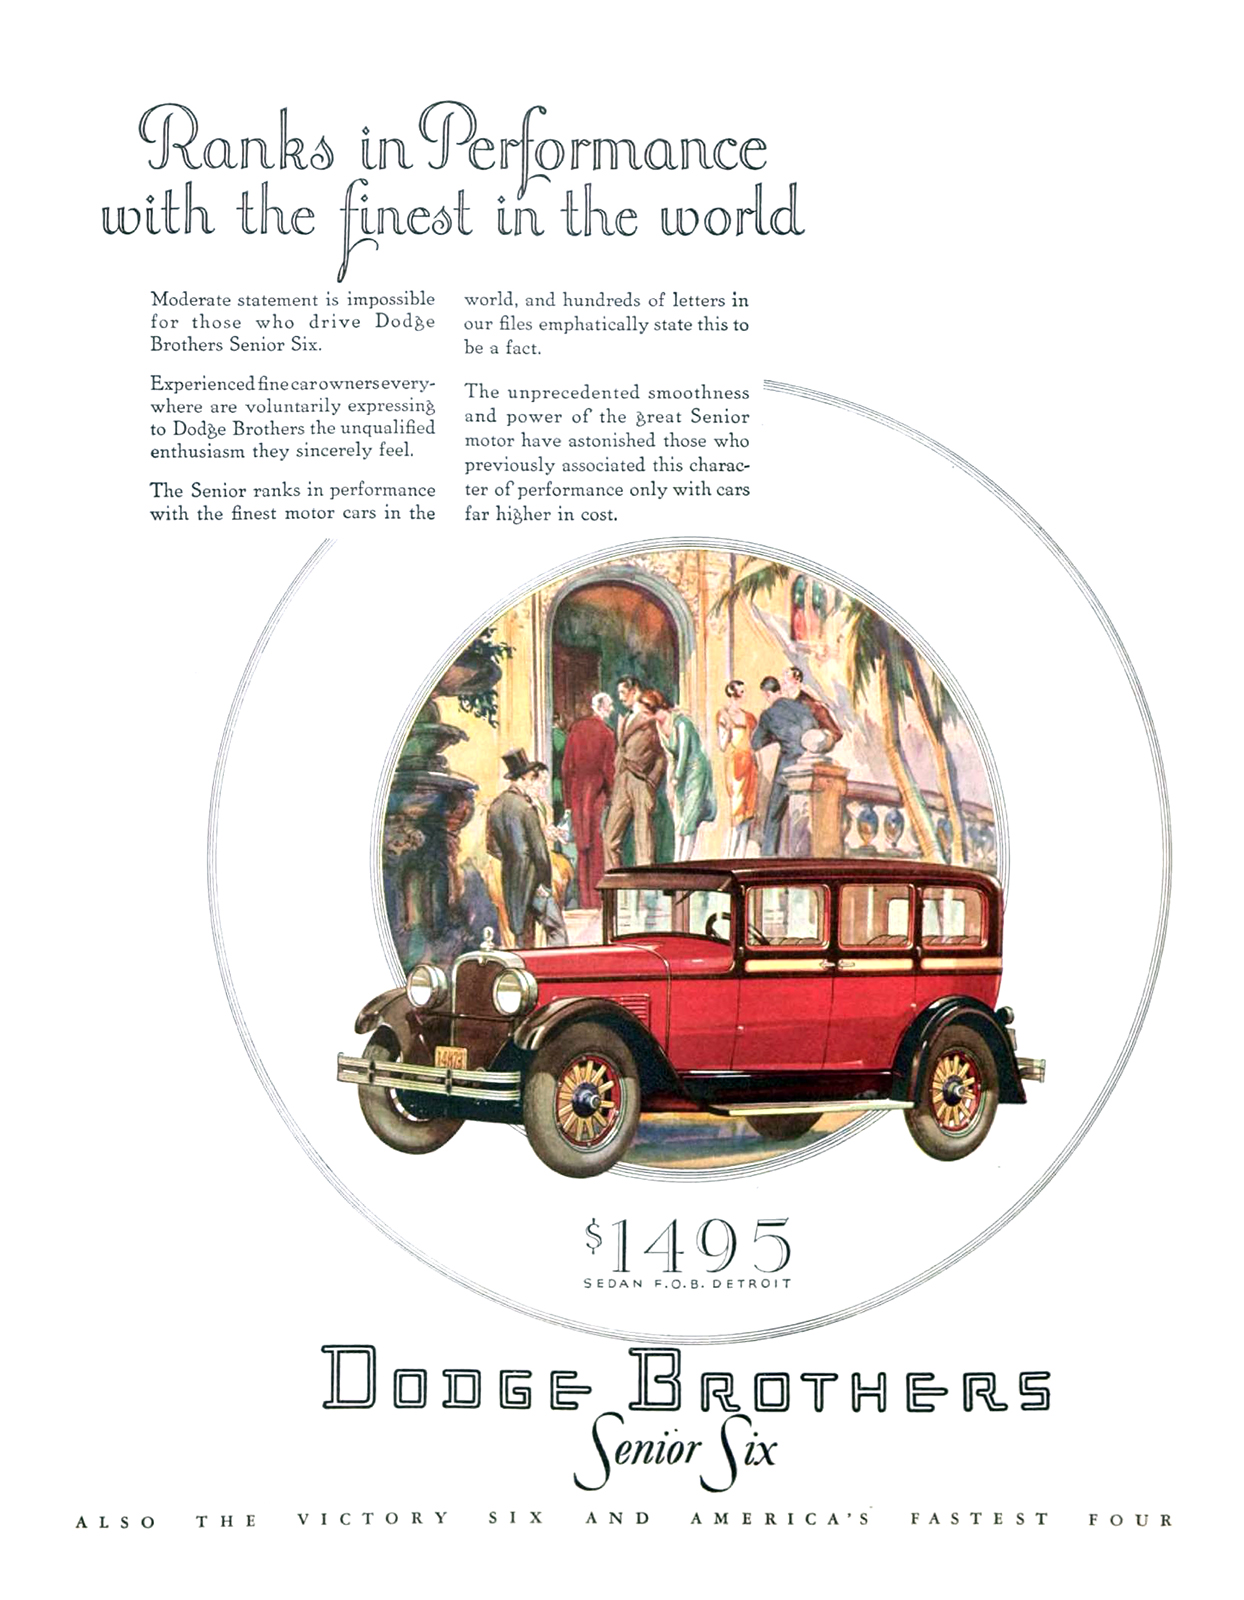 Dodge Brothers Senior Six Sedan Ad (February, 1928): Ranks in Performance with the finest in the world